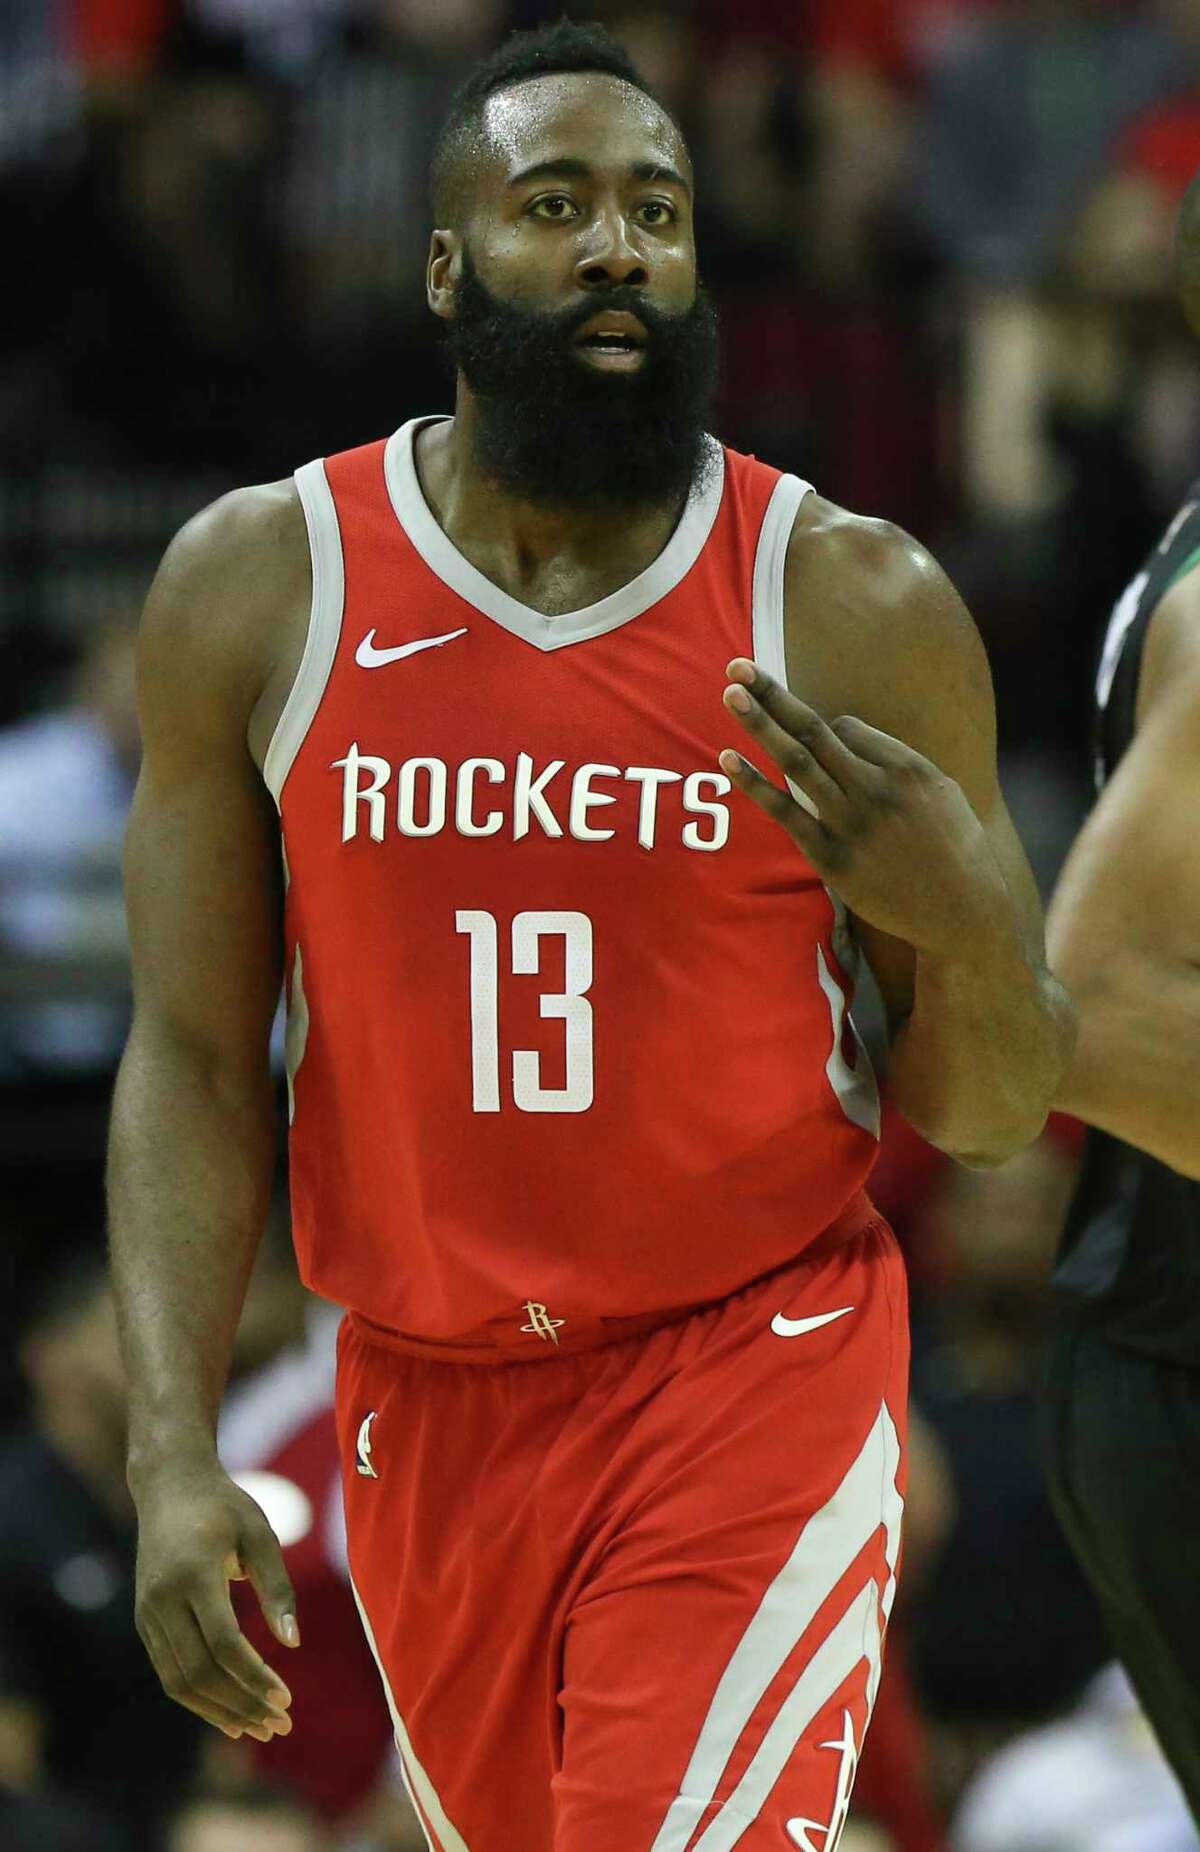 Rockets guard James Harden looks forward to the pressure-cooker atmosphere that comes with being favored.